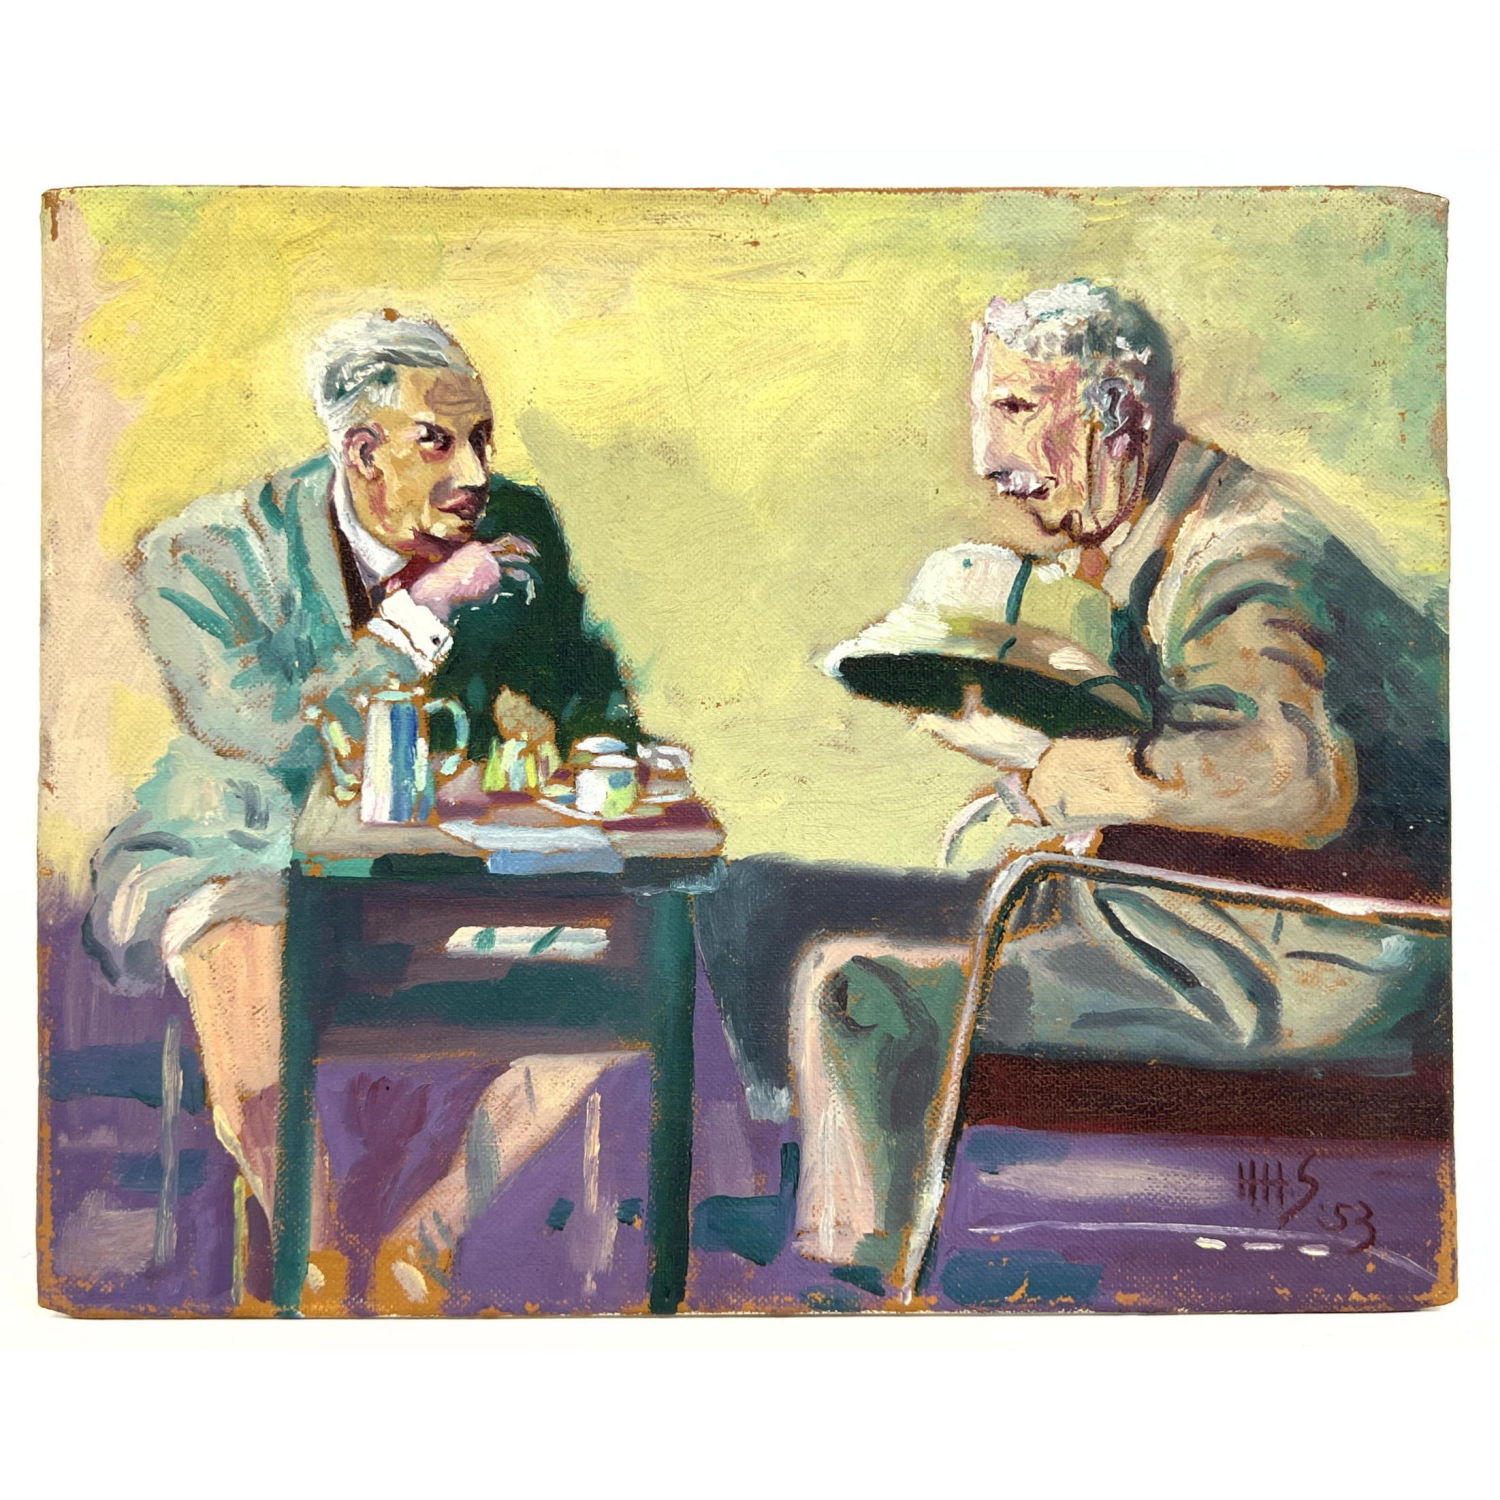 Signed HHS 53 Painting of Two Gentlemen 2bac17